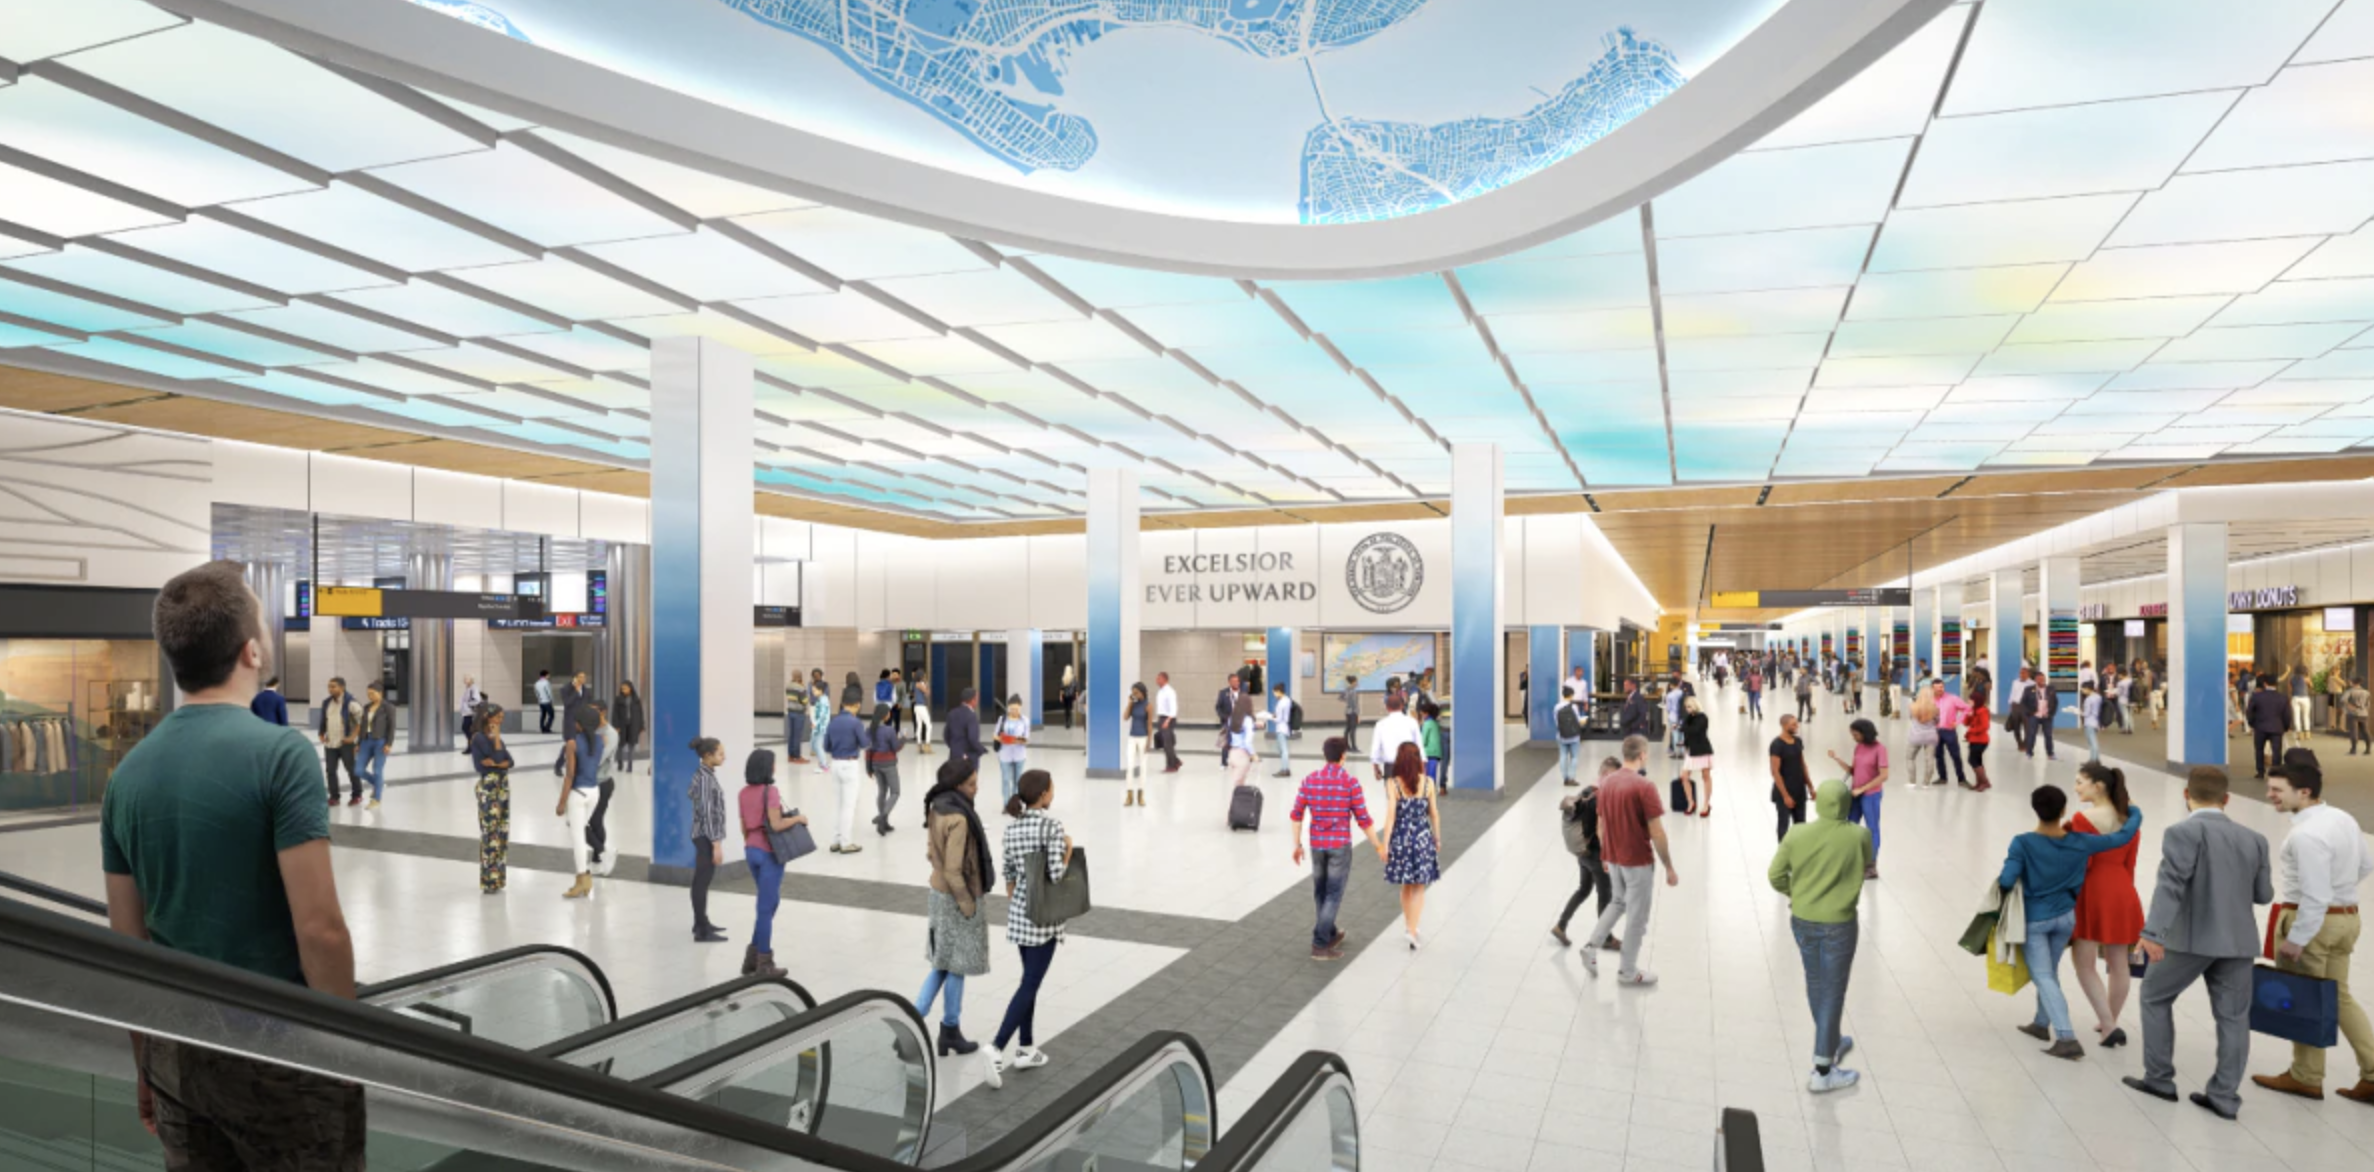 LIRR 33rd Street Concourse – opening early 2023